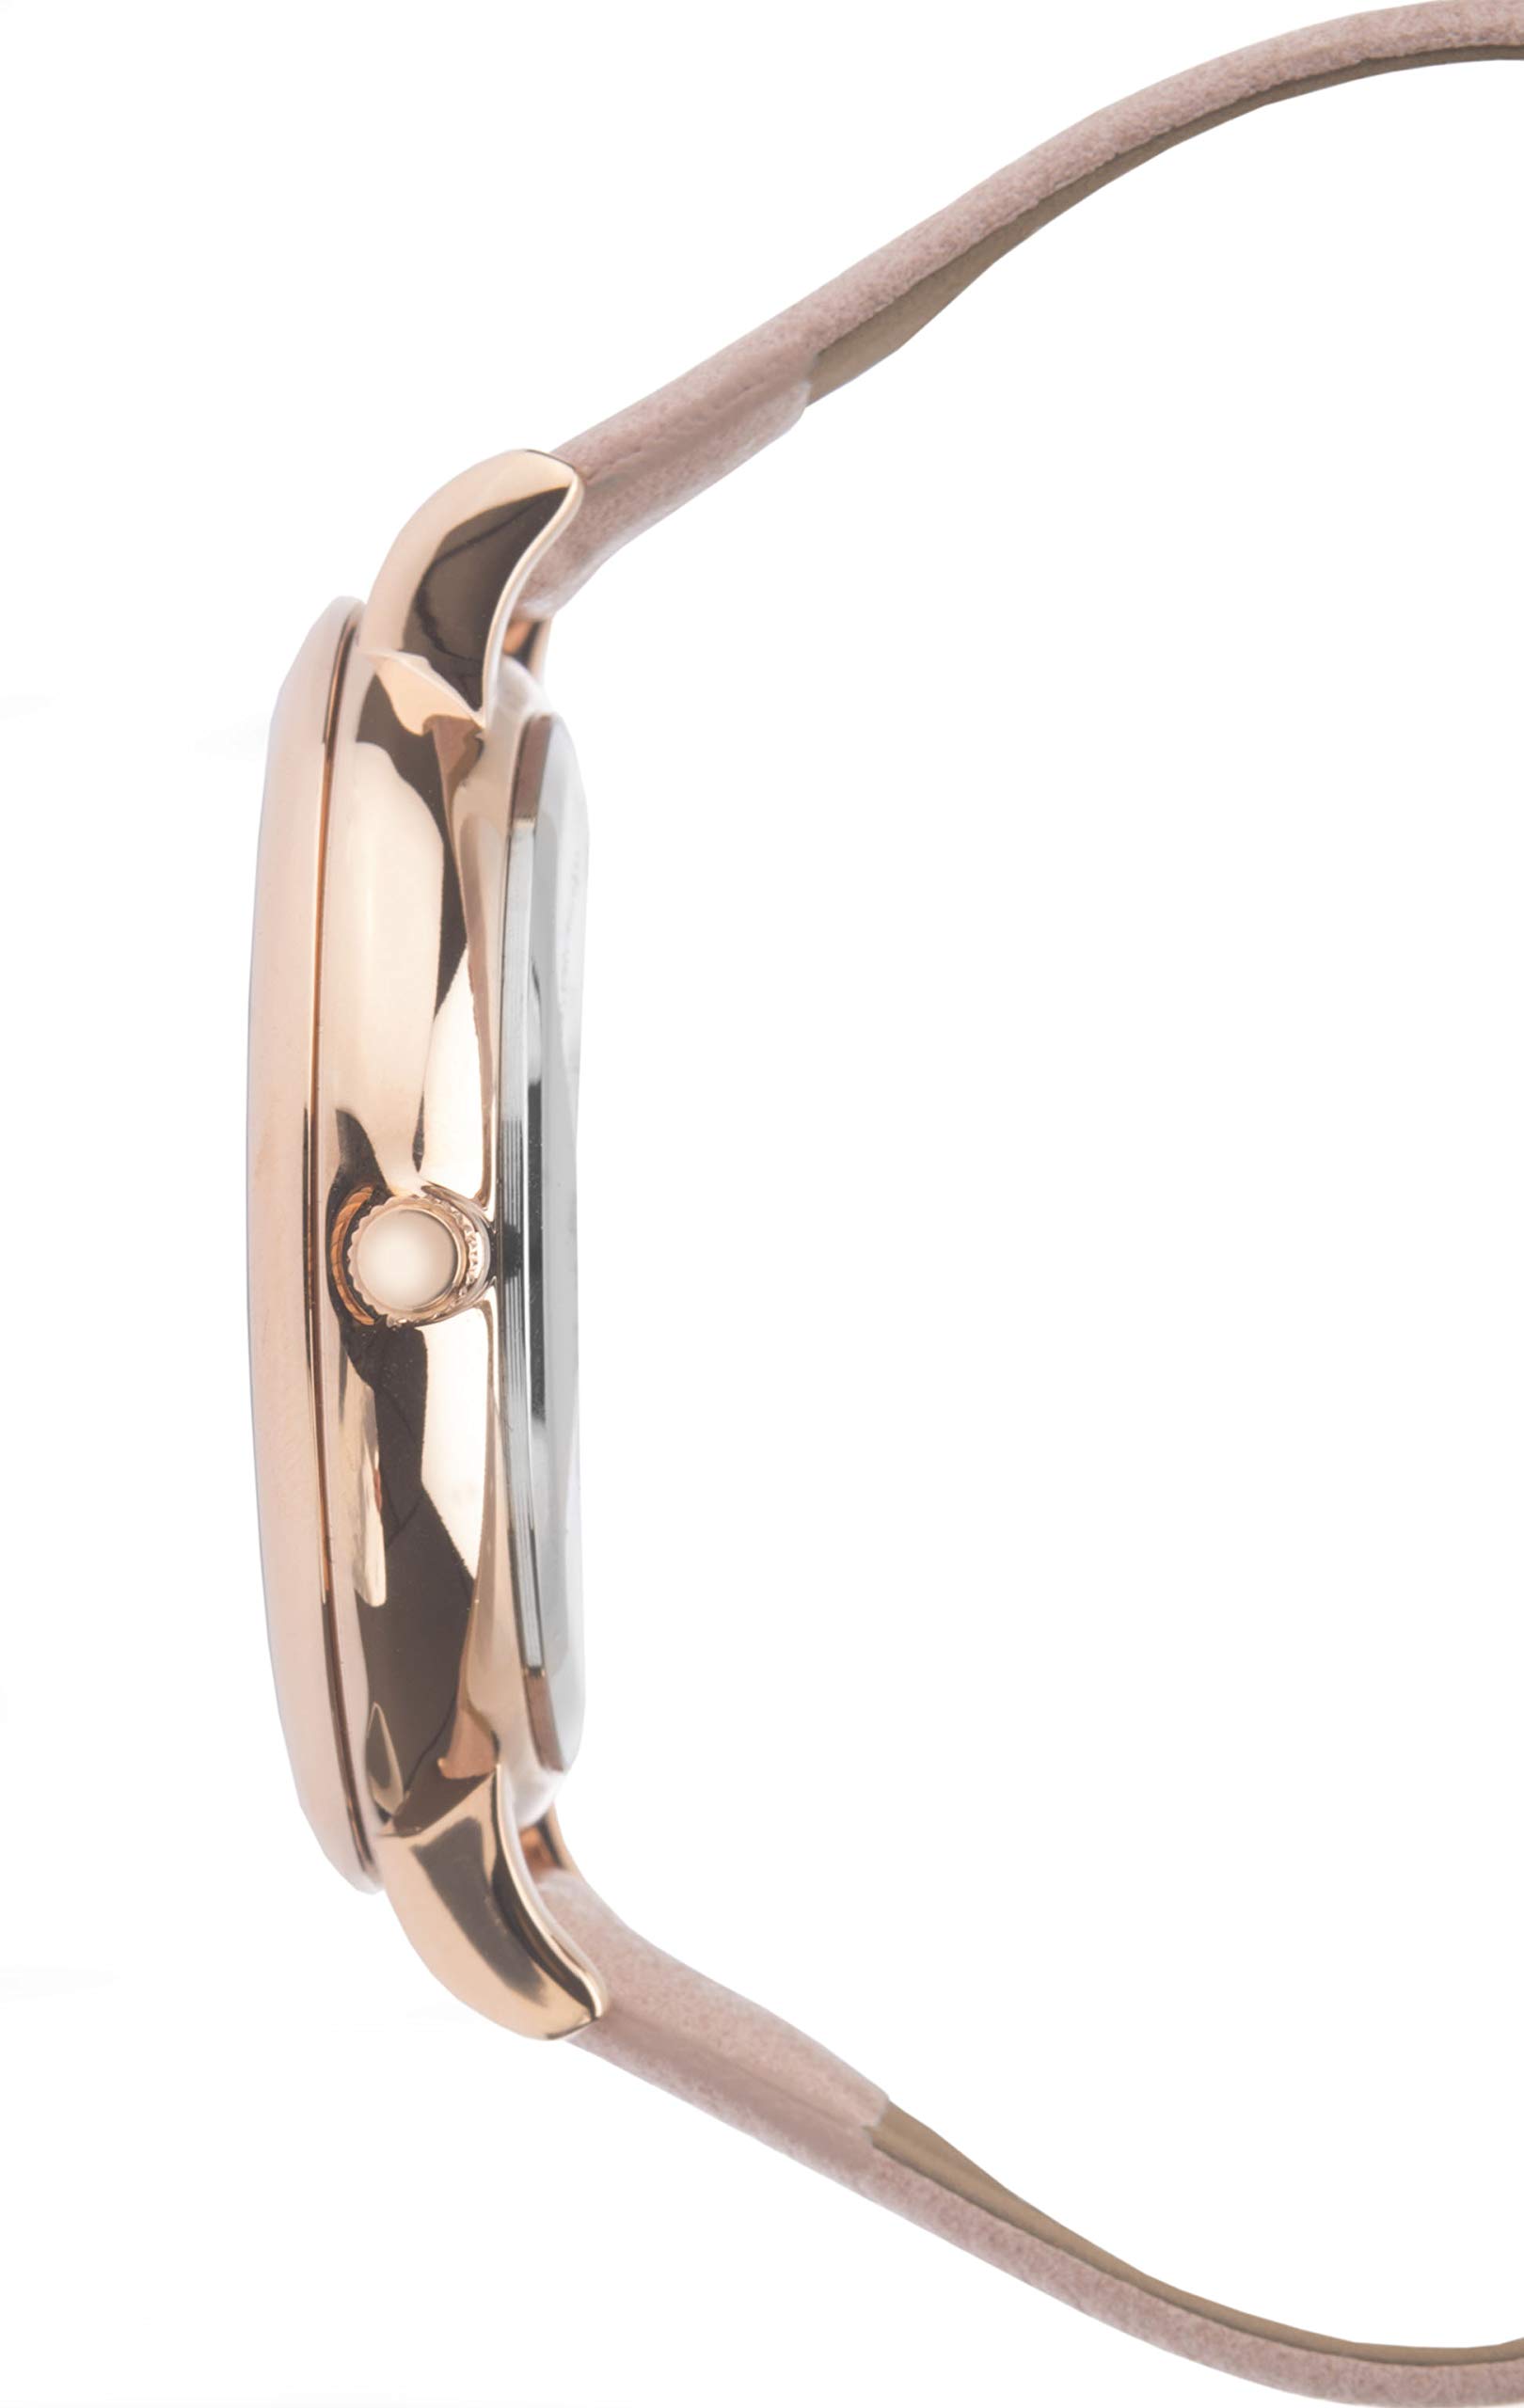 Sekonda Women's 40mm Analogue Rose Gold 3 Hand Quartz Watch with Patterned Pink Dial and Dusty Pink Strap with Rose Gold Buckle and Mineral Glass